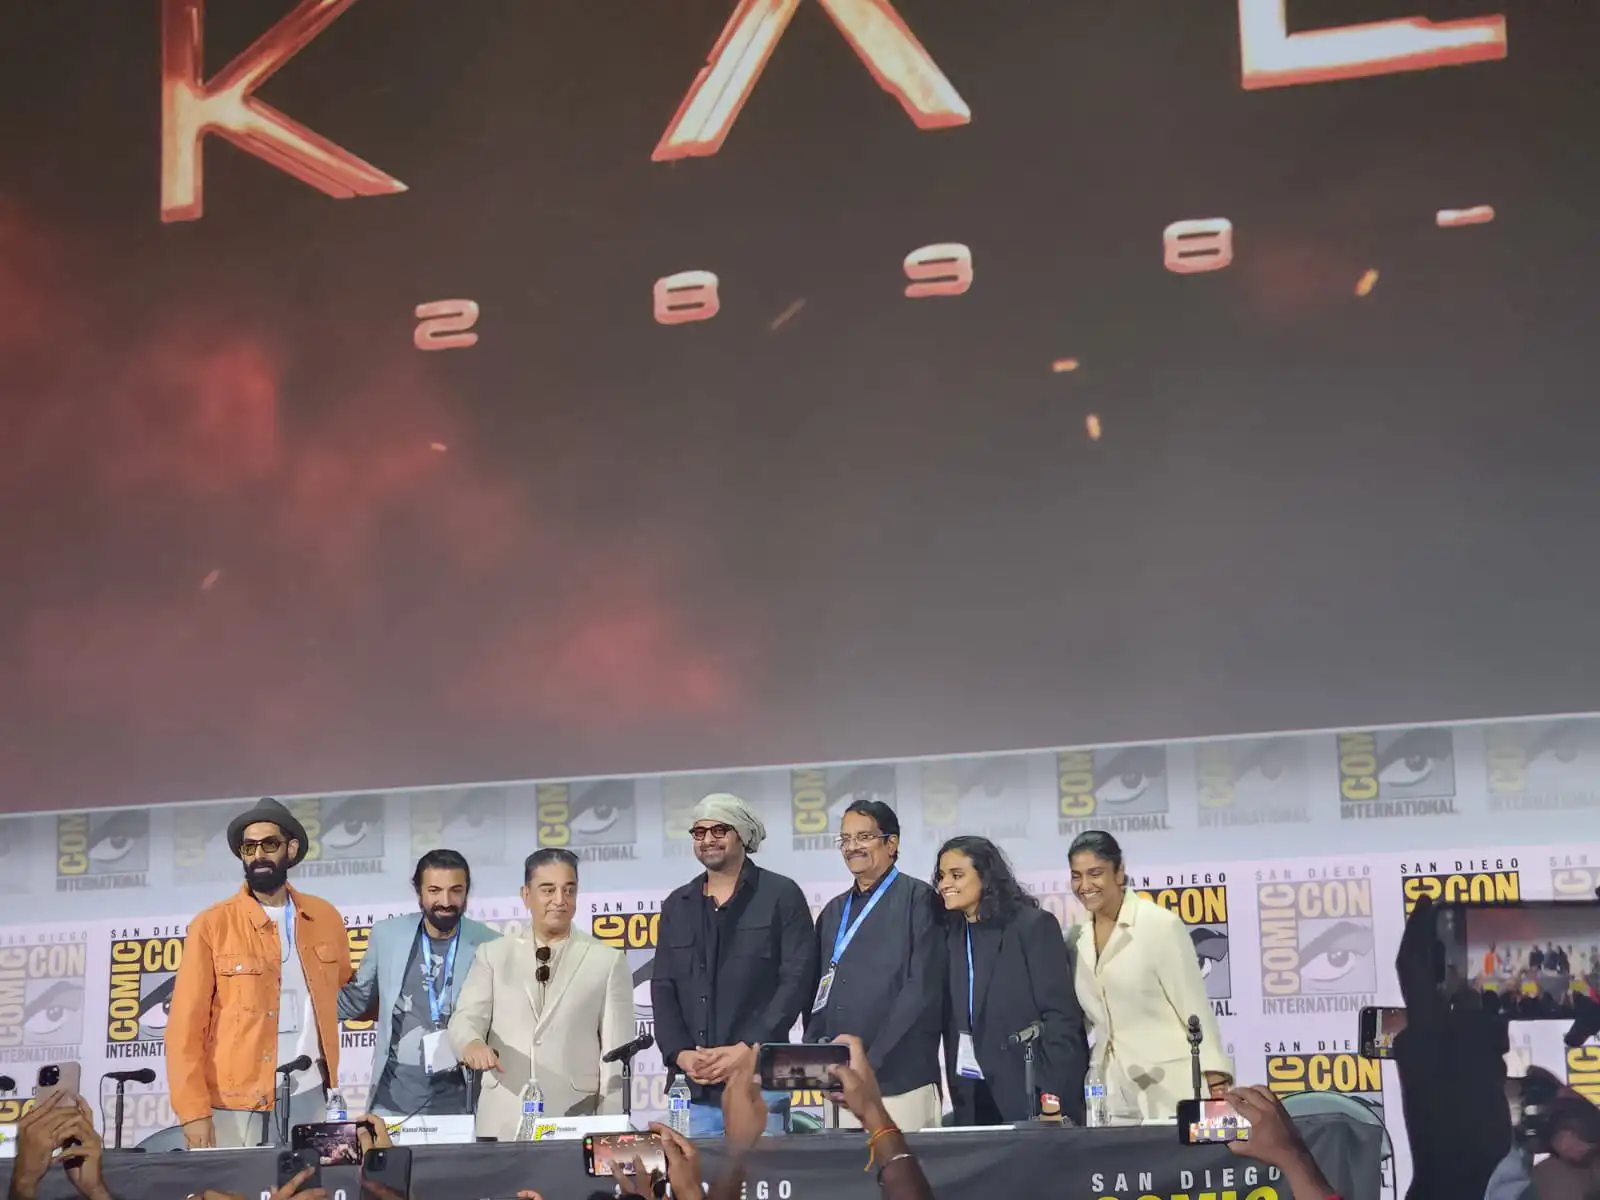 Project K Movie Team at Comic Con Event 